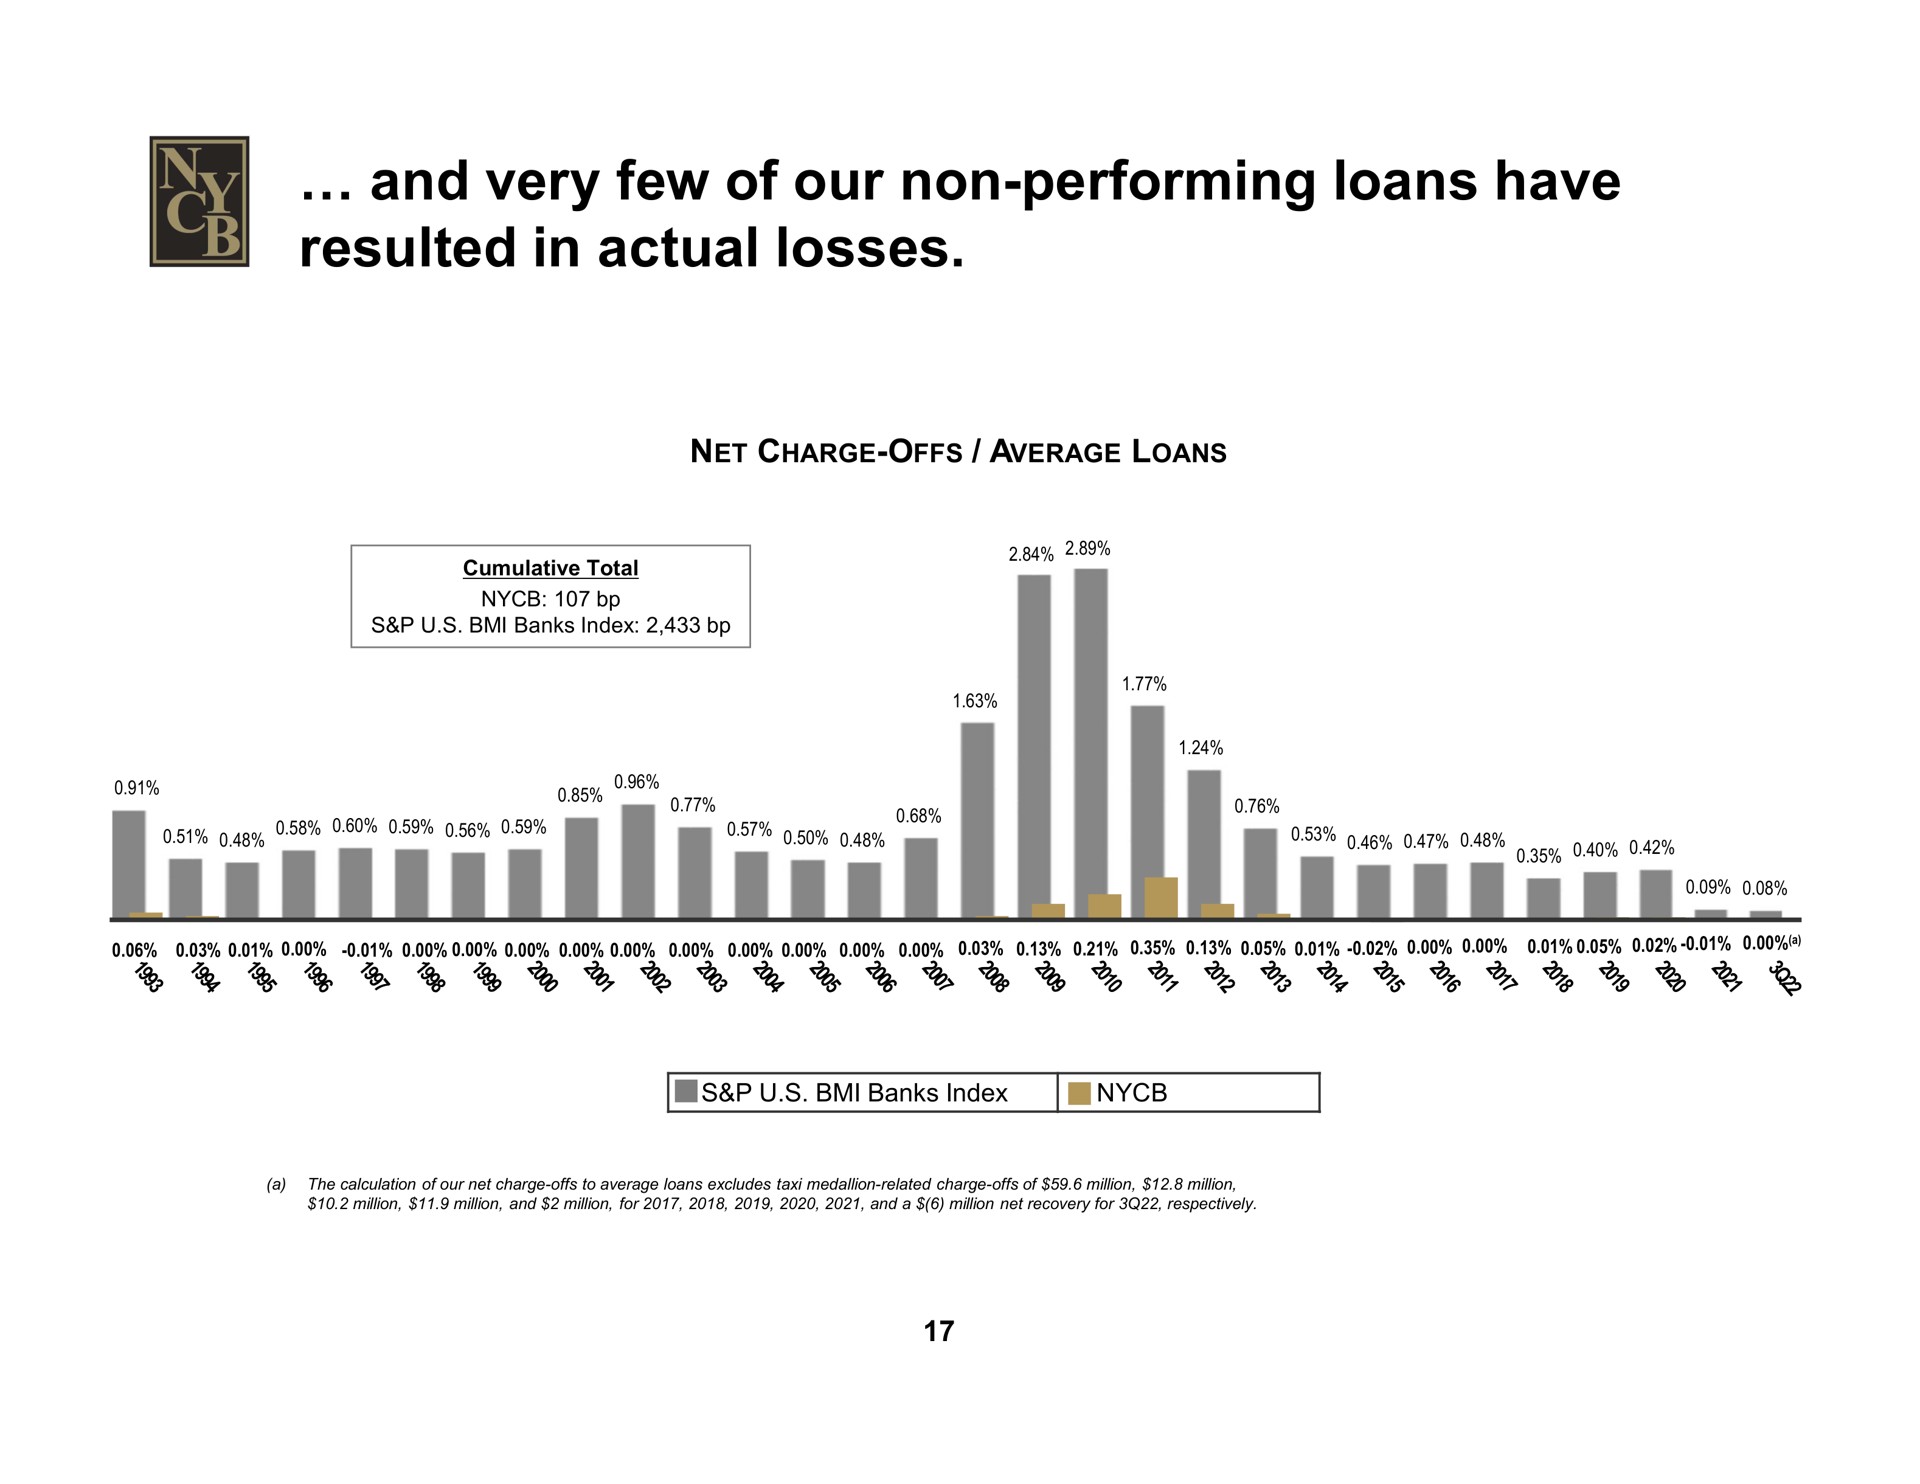 and very few of our non performing loans have resulted in actual losses | New York Community Bancorp